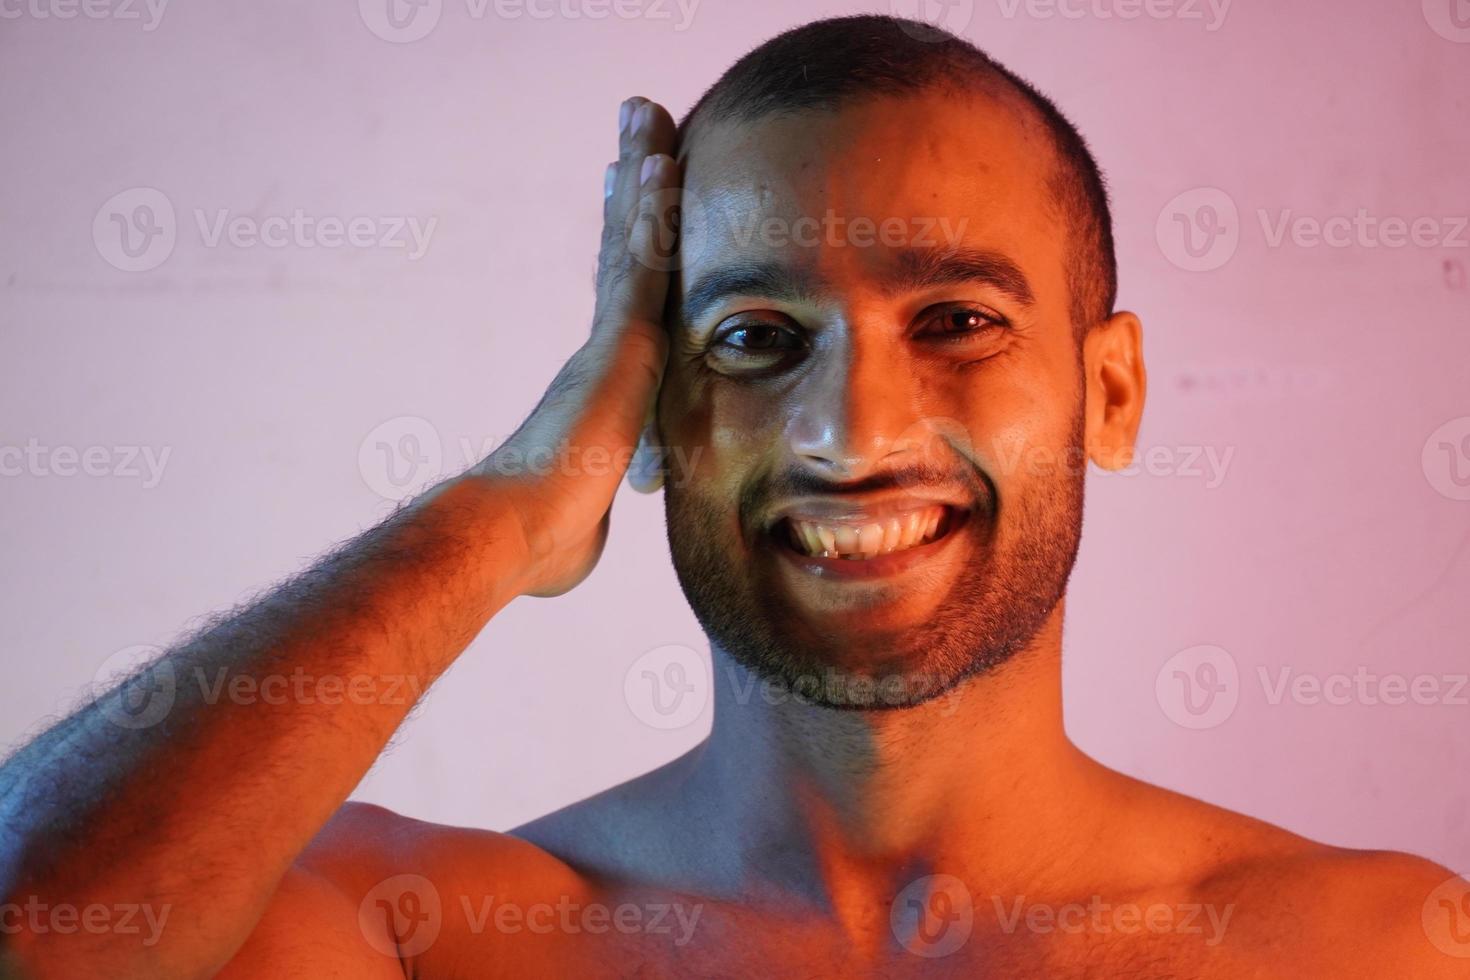 bald man smiling in pink background photo